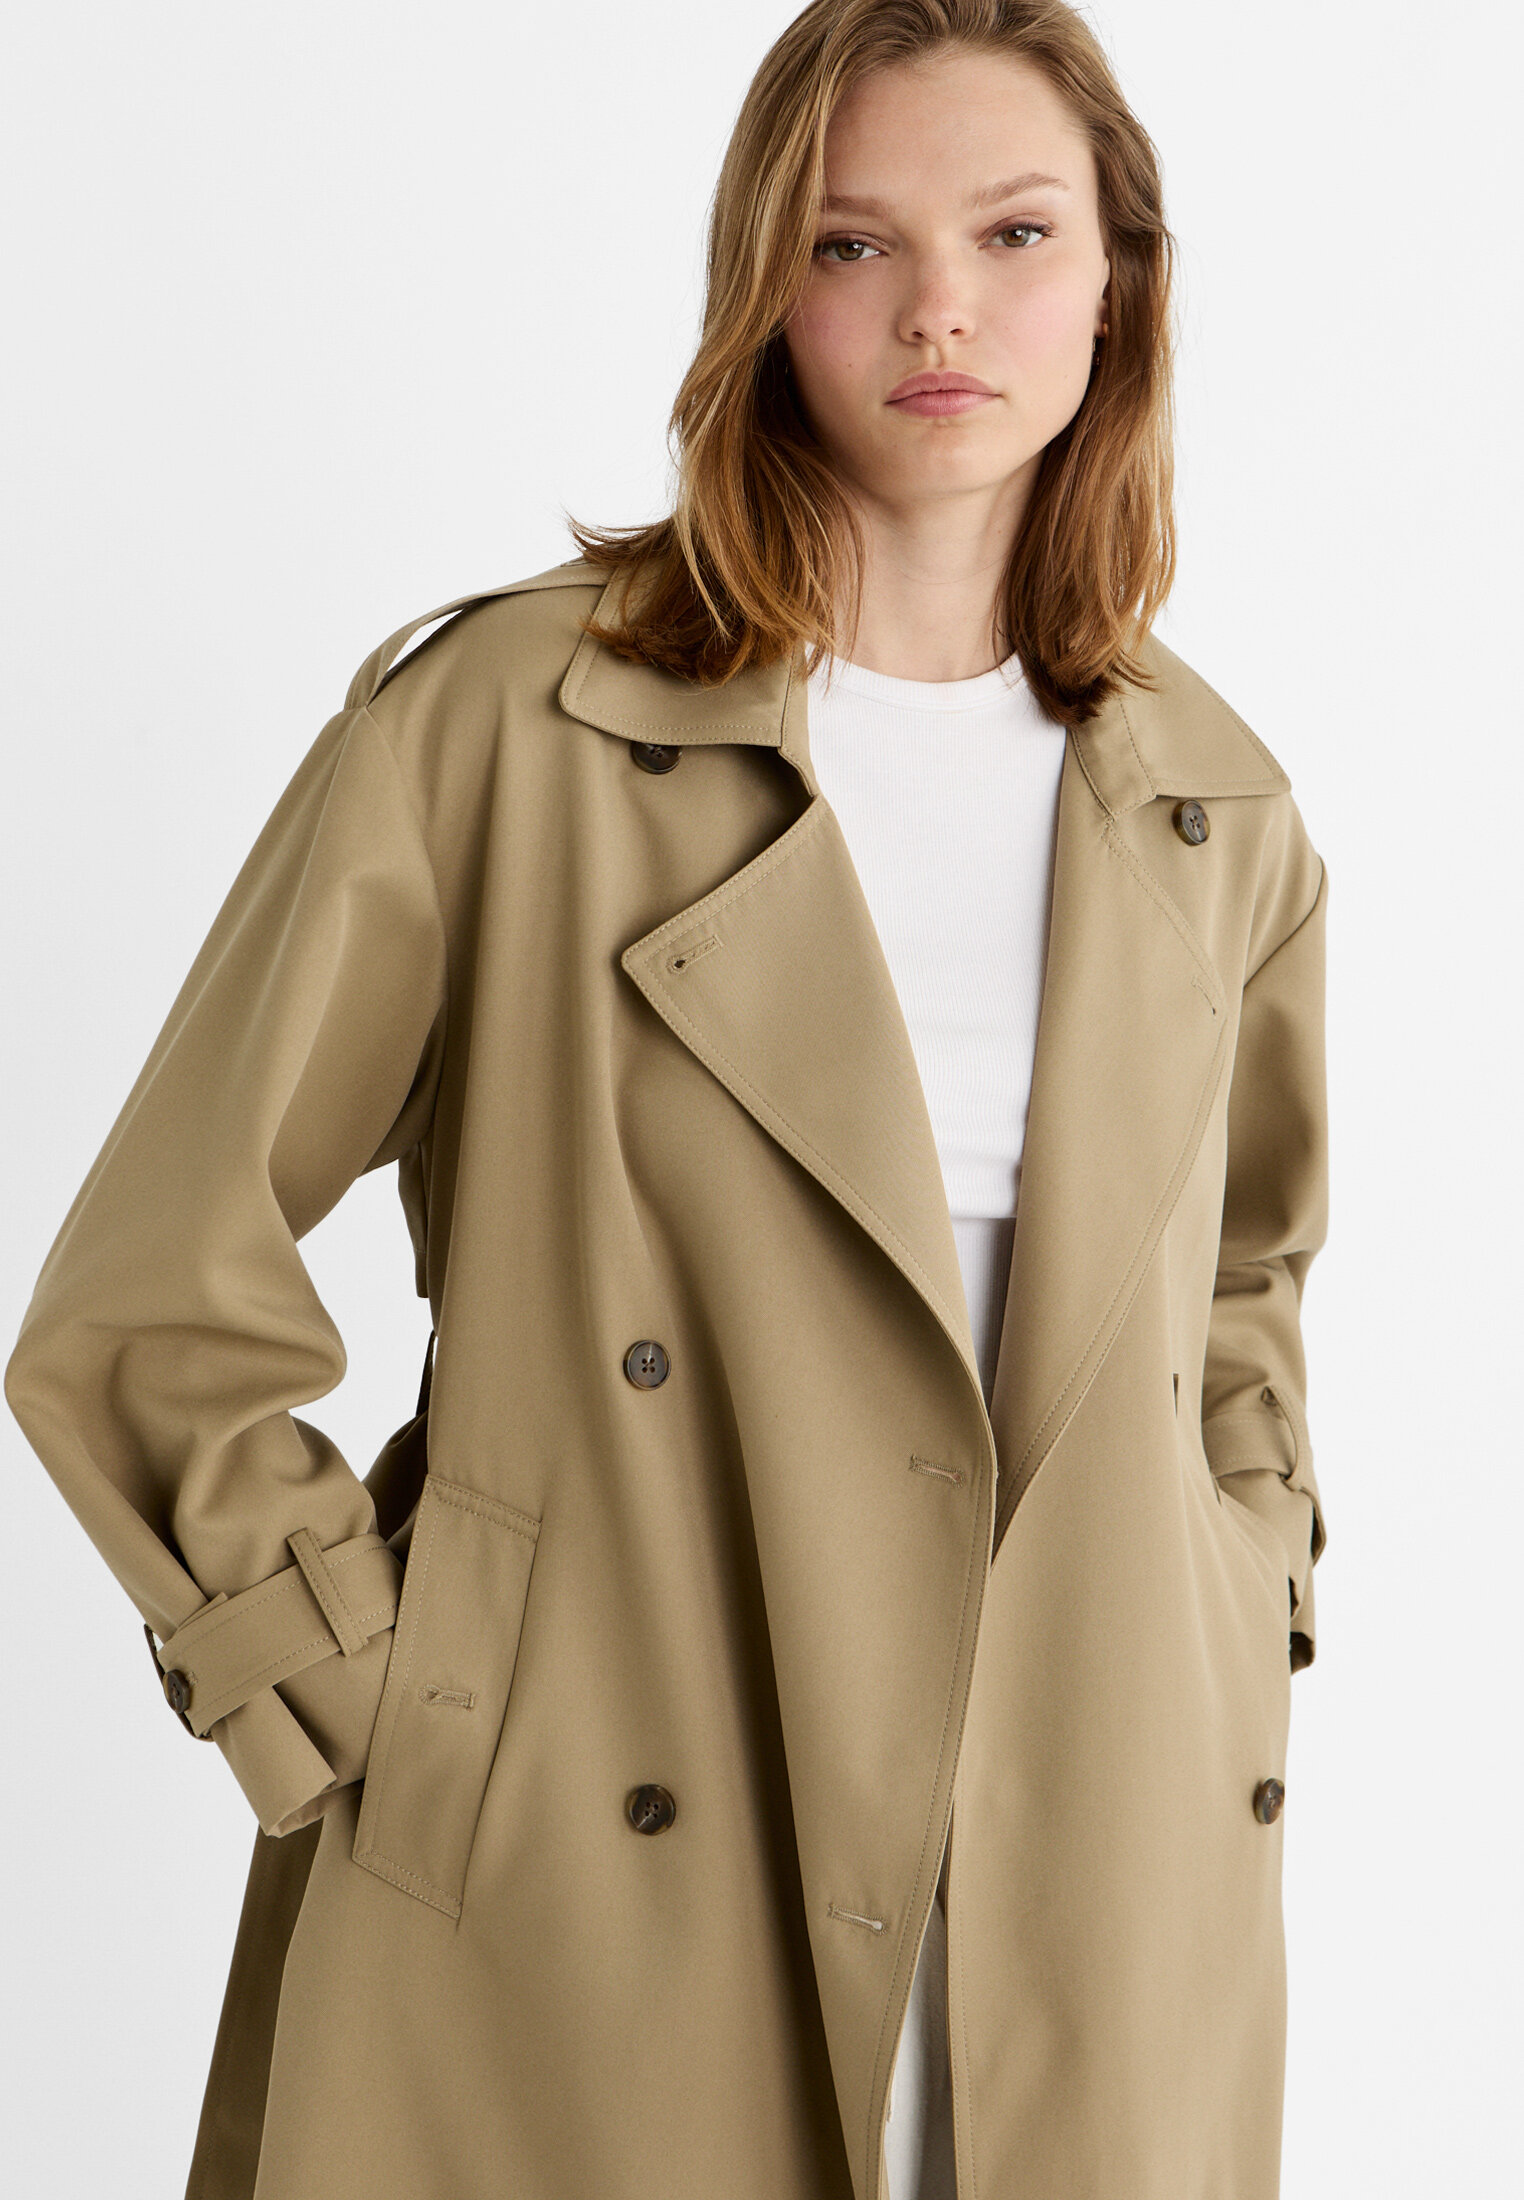 Long flowing lined trench coat